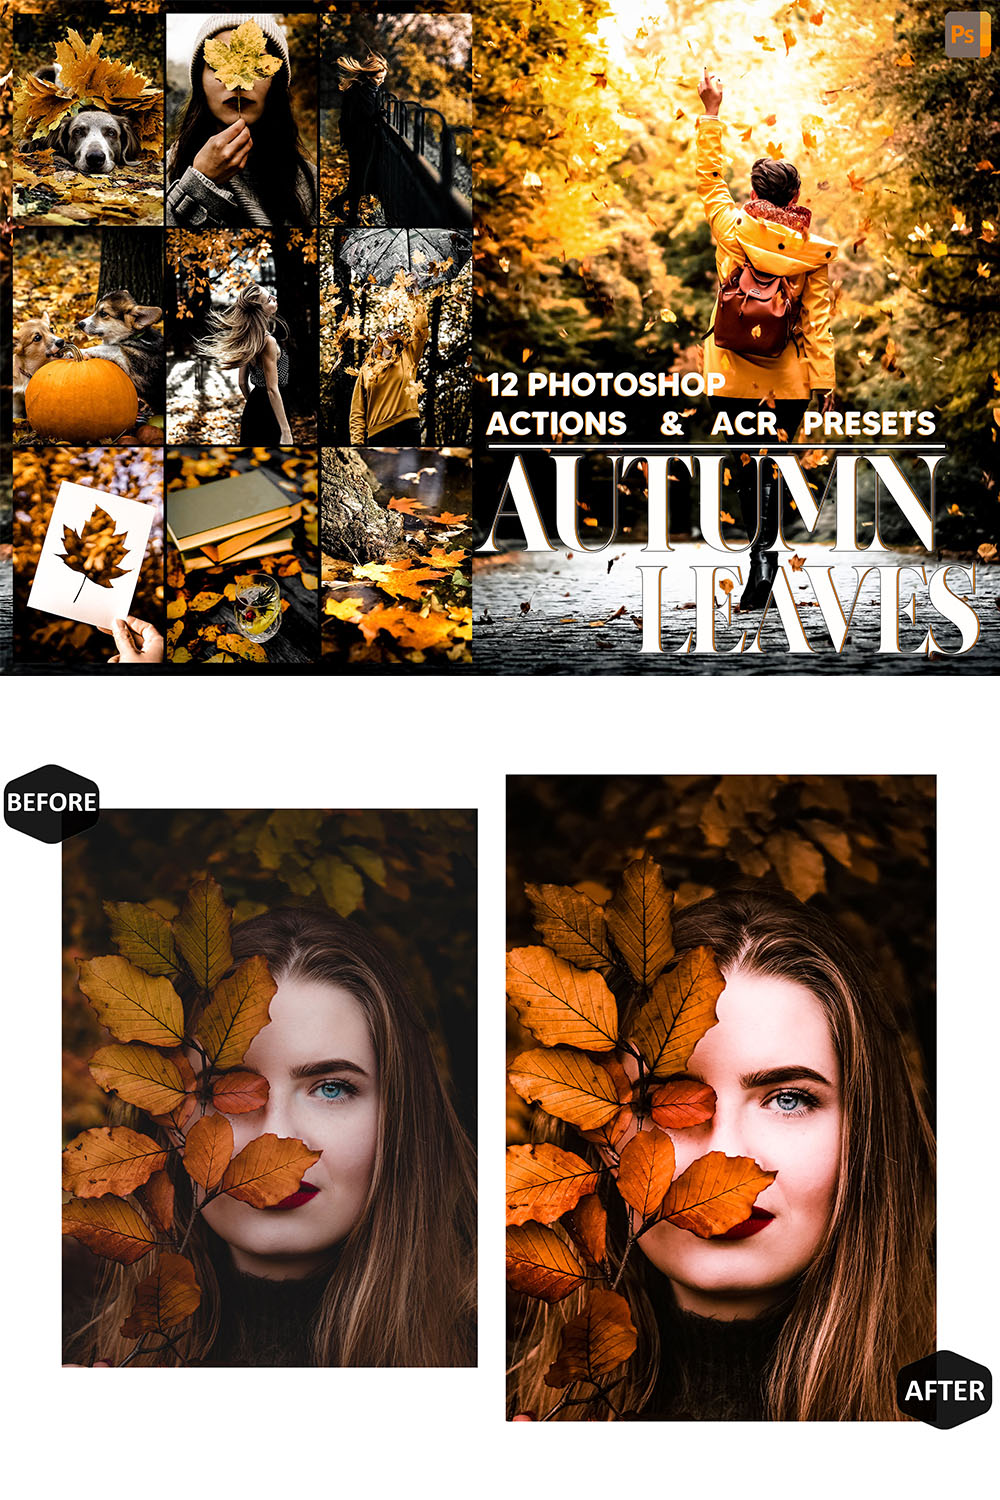 12 Photoshop Actions, Autumn Leaves Ps Action, Fall ACR Preset, Pumpkin Ps Filter, Atn Portrait And Lifestyle Theme For Instagram, Blogger pinterest preview image.